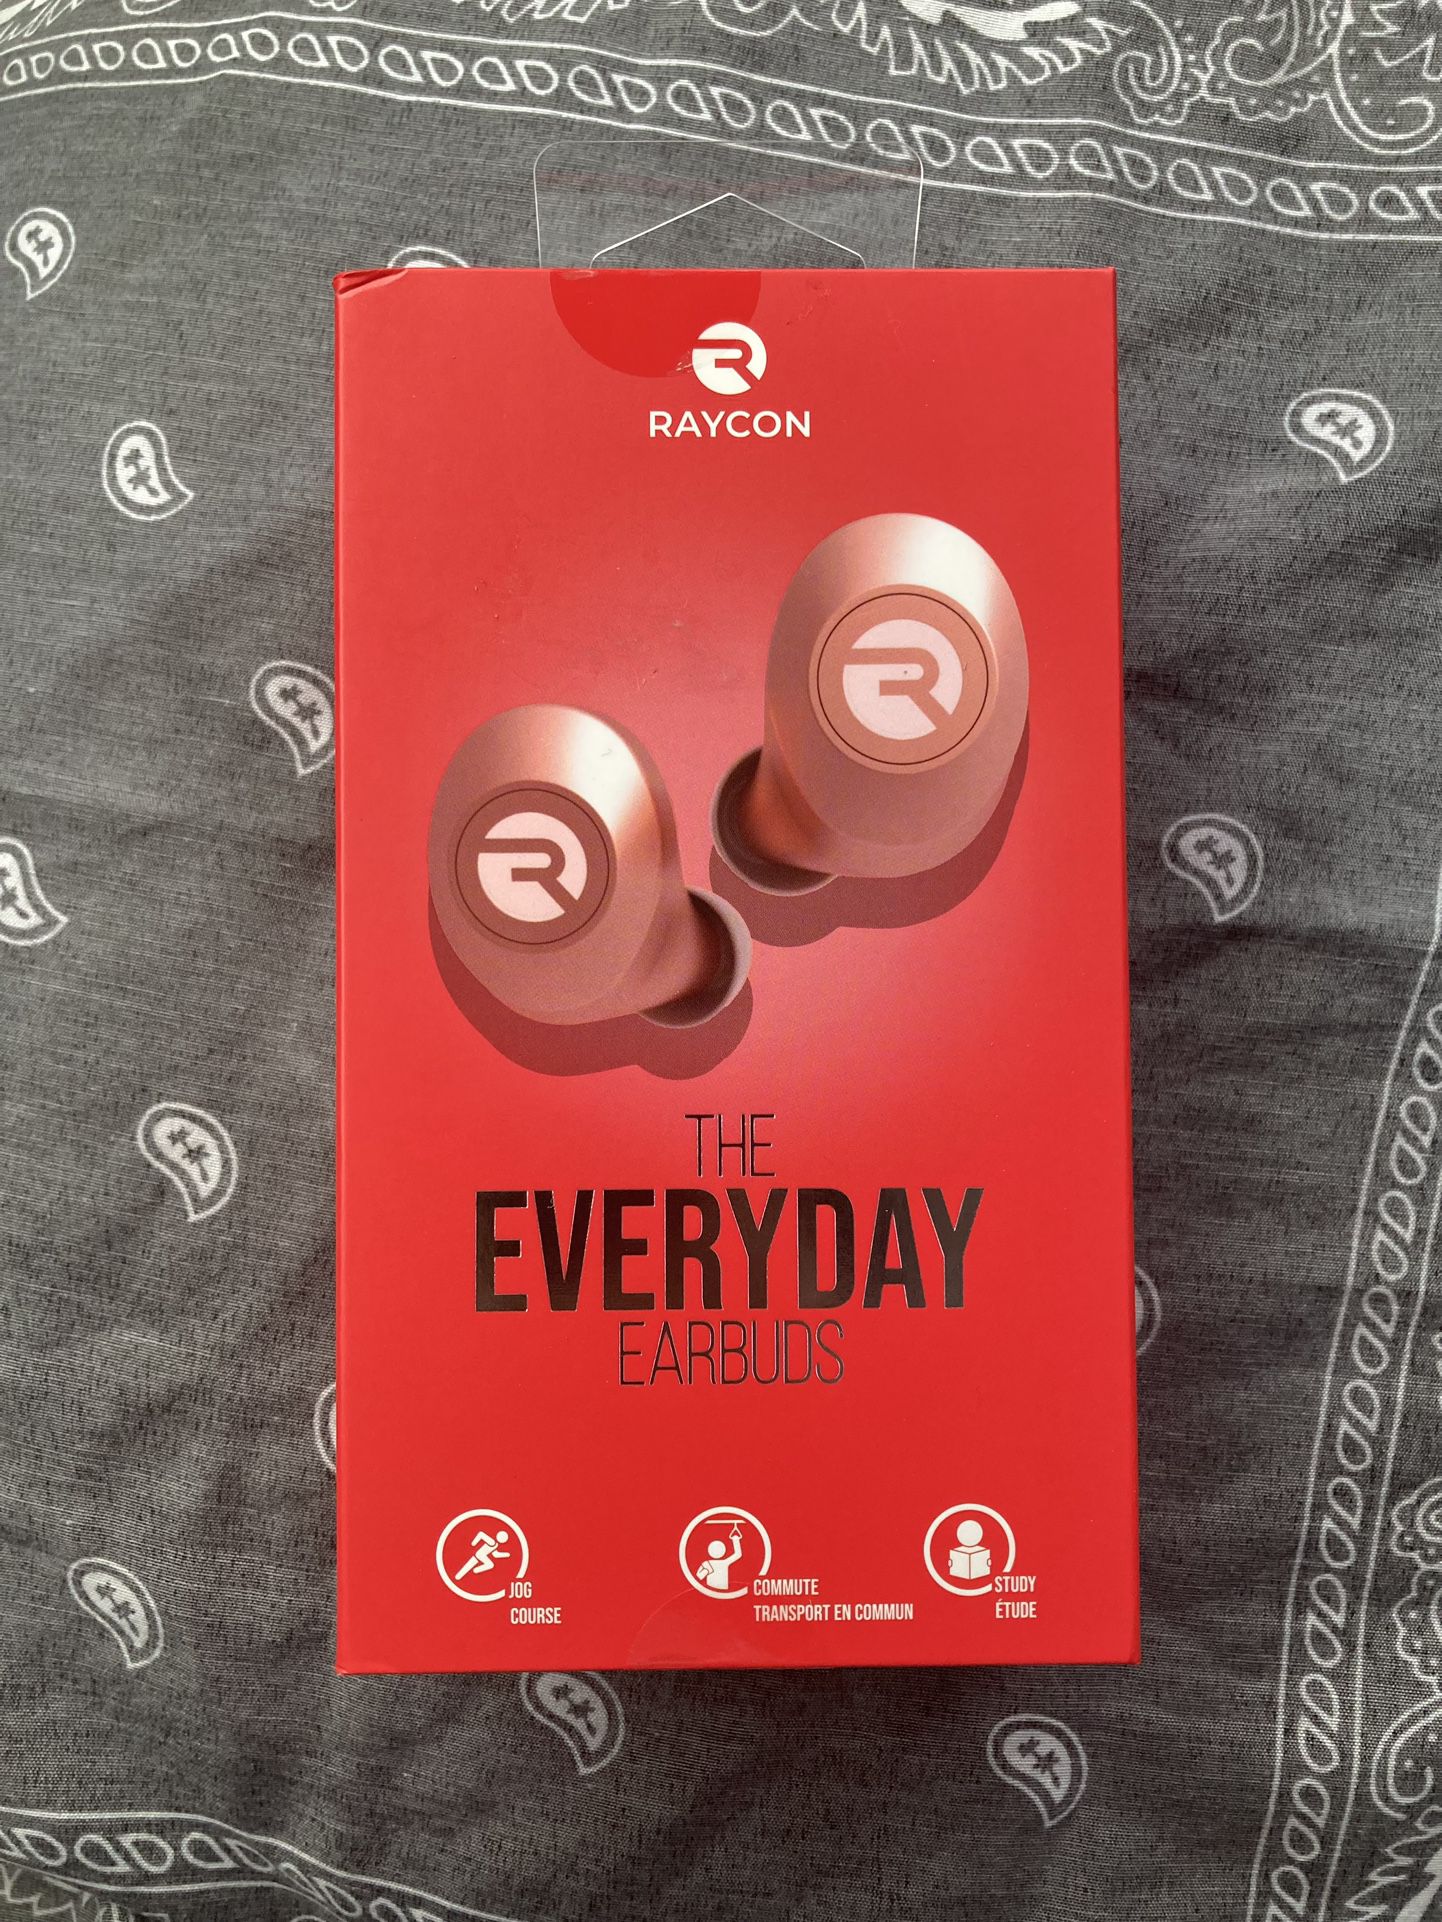 Raycon The Everyday In-Ear True Wireless Stereo BT Earbuds Rose Gold